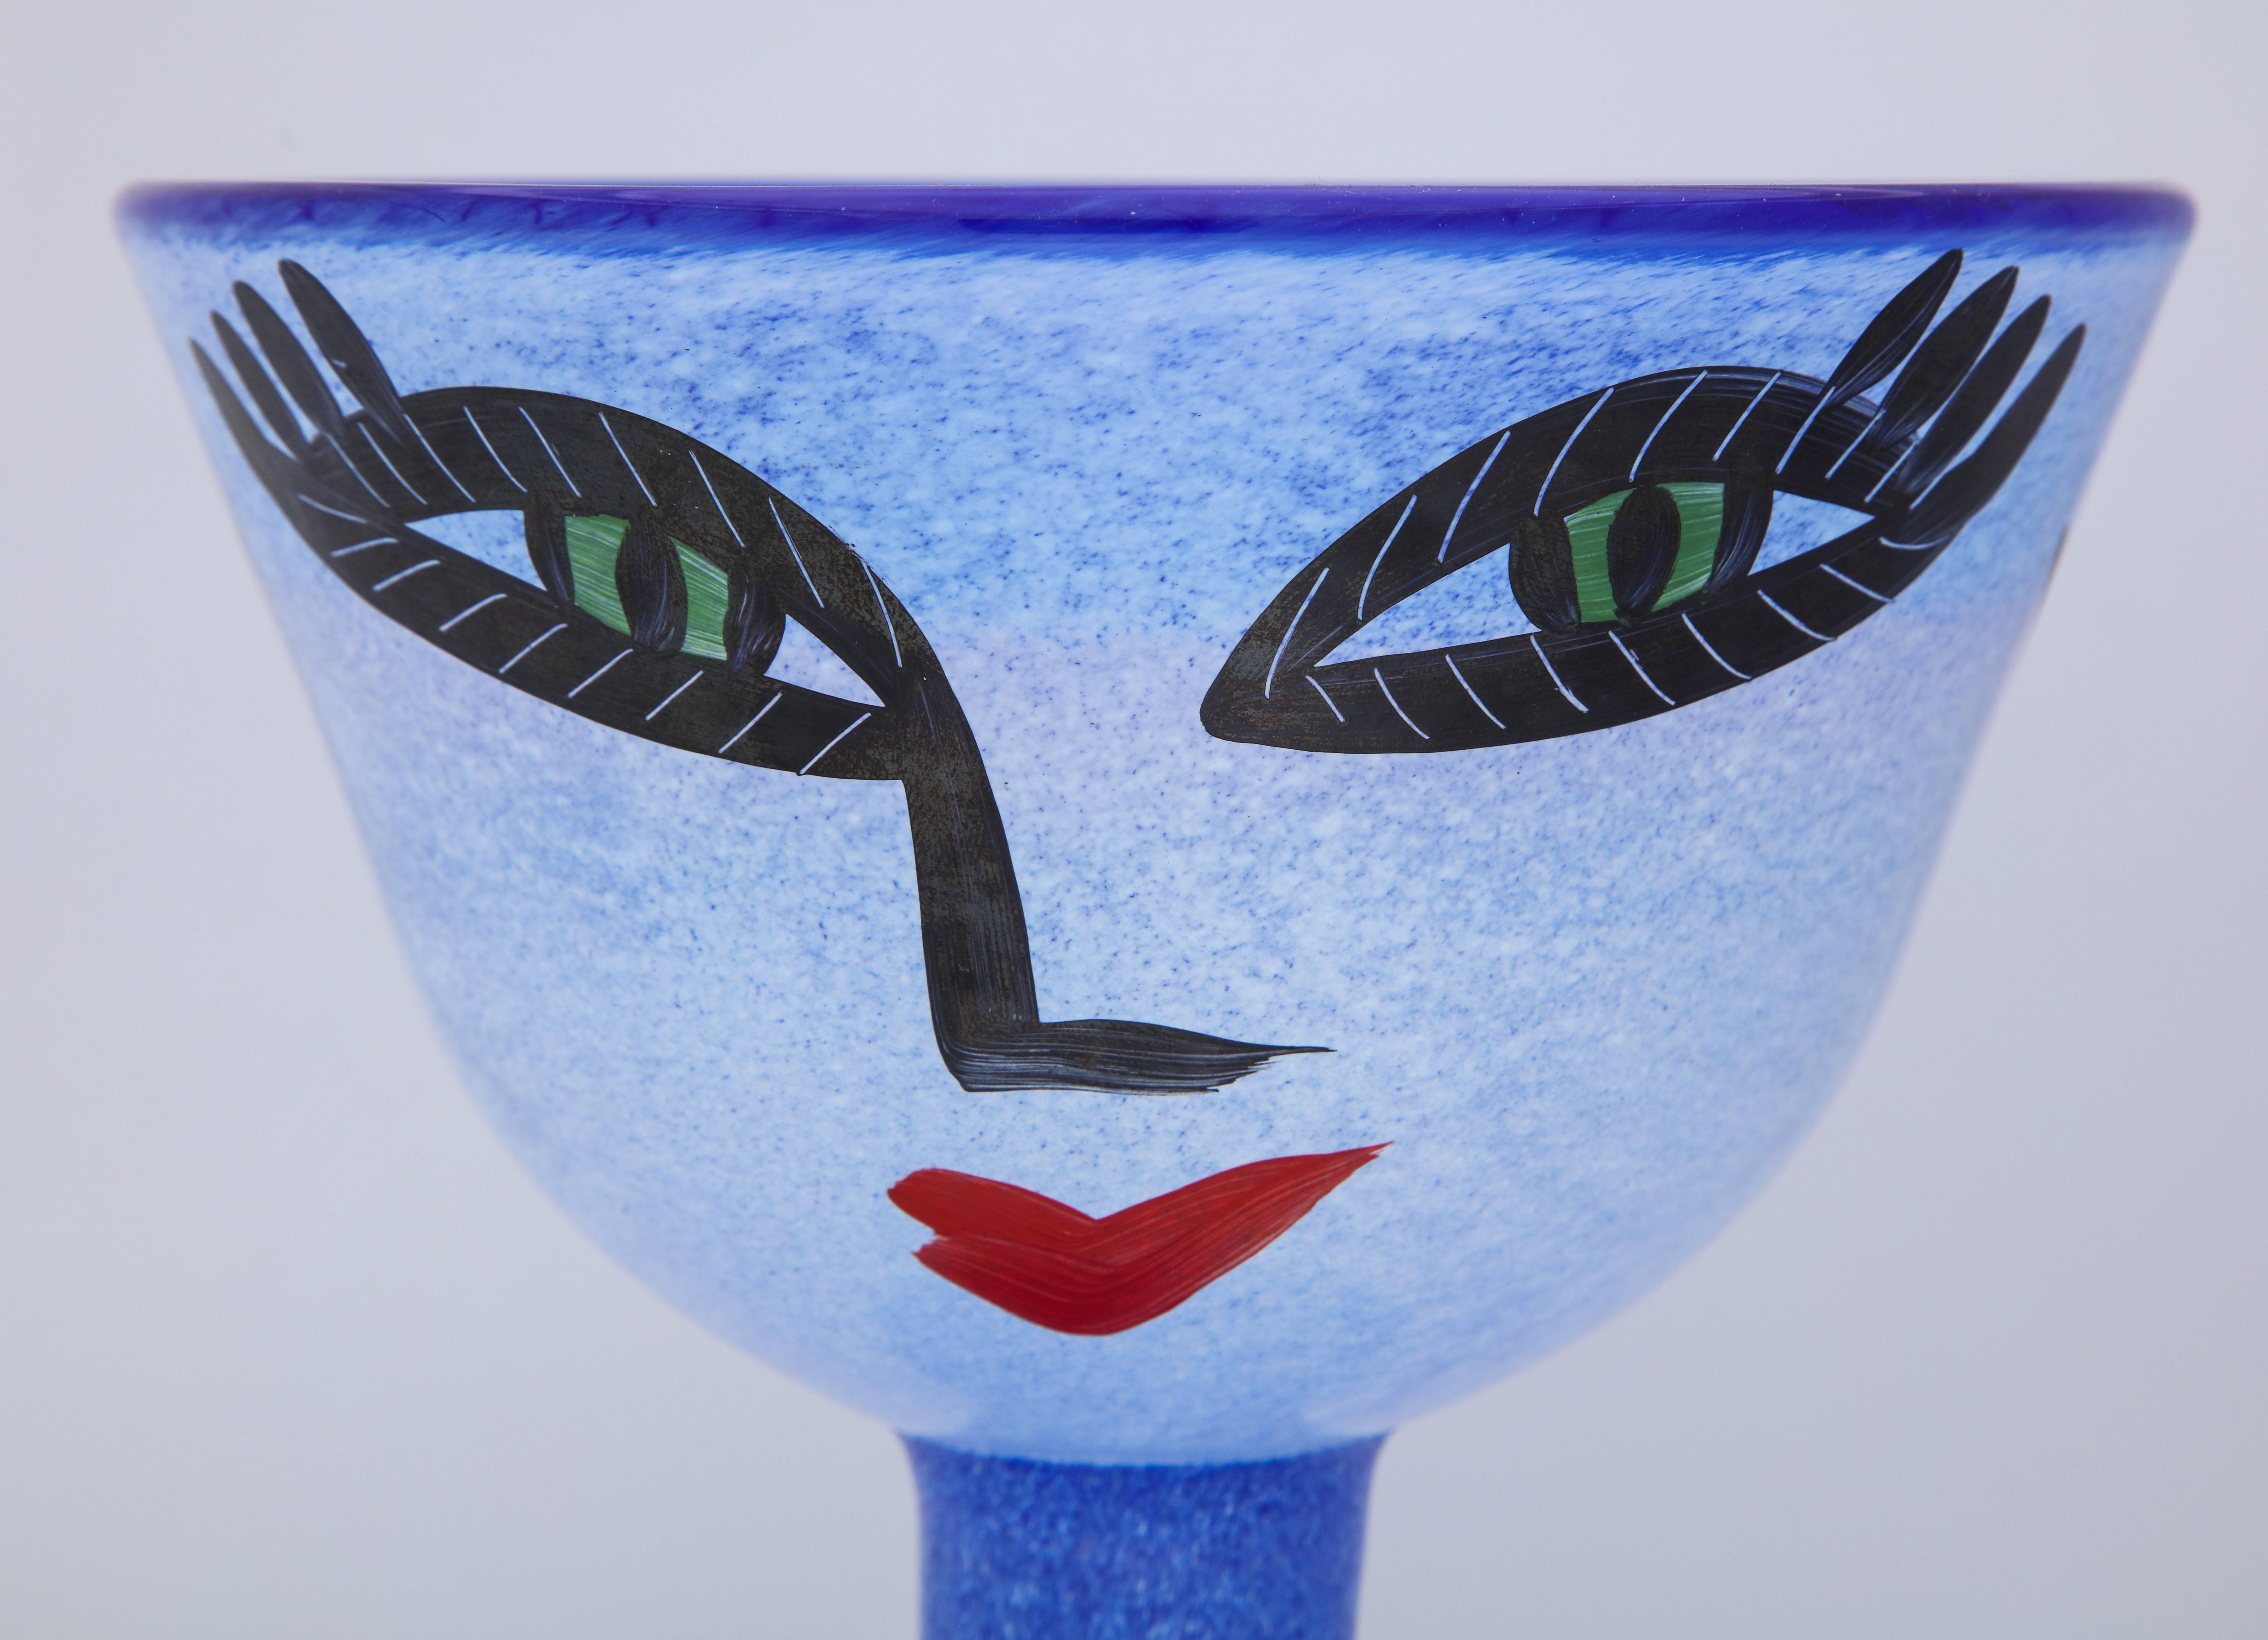 A wonderful hand-painted cup by Ulrica Hydman-Vallien for Kosta Boda.